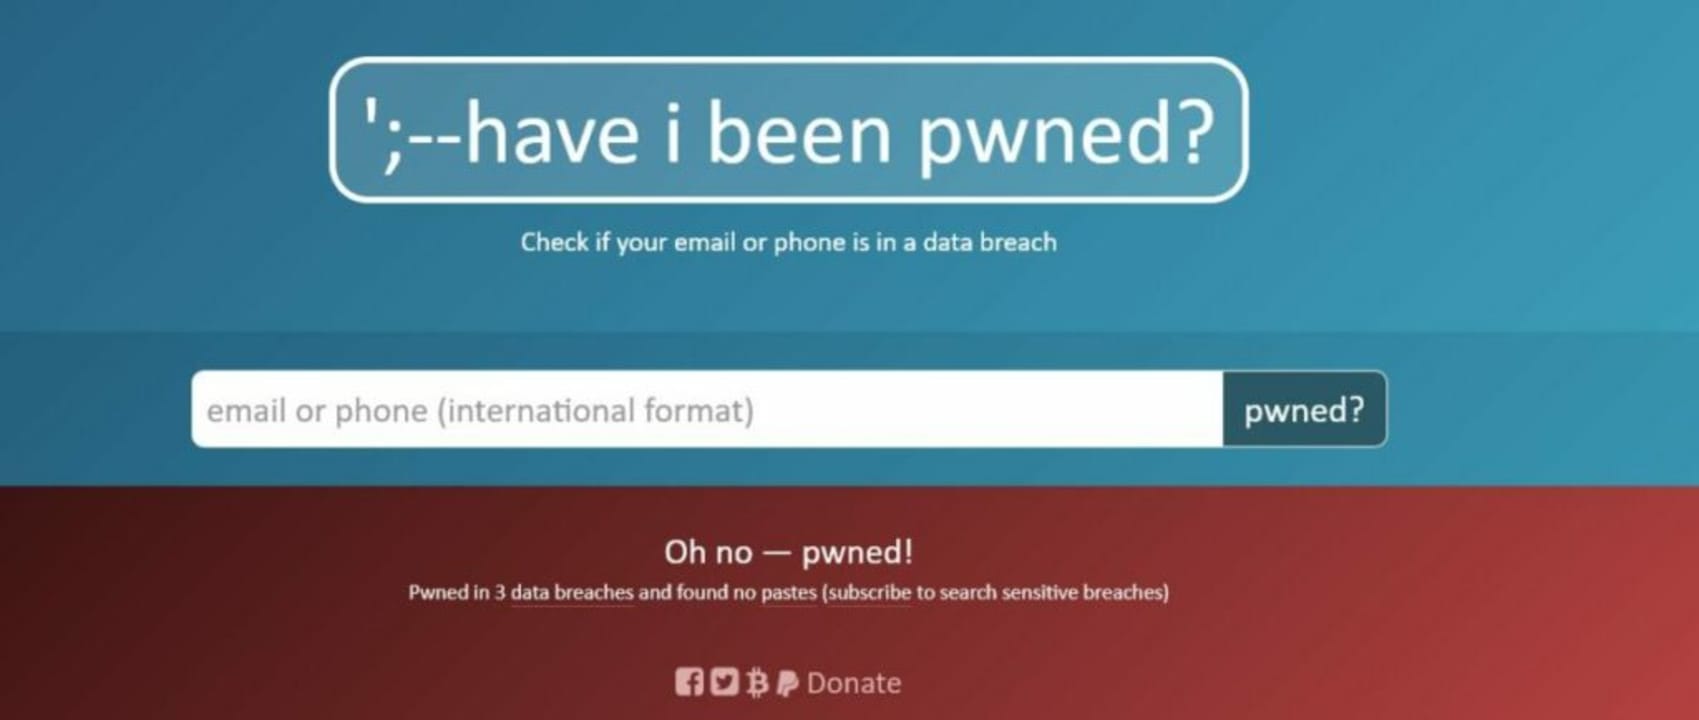 have I been pwned data checks